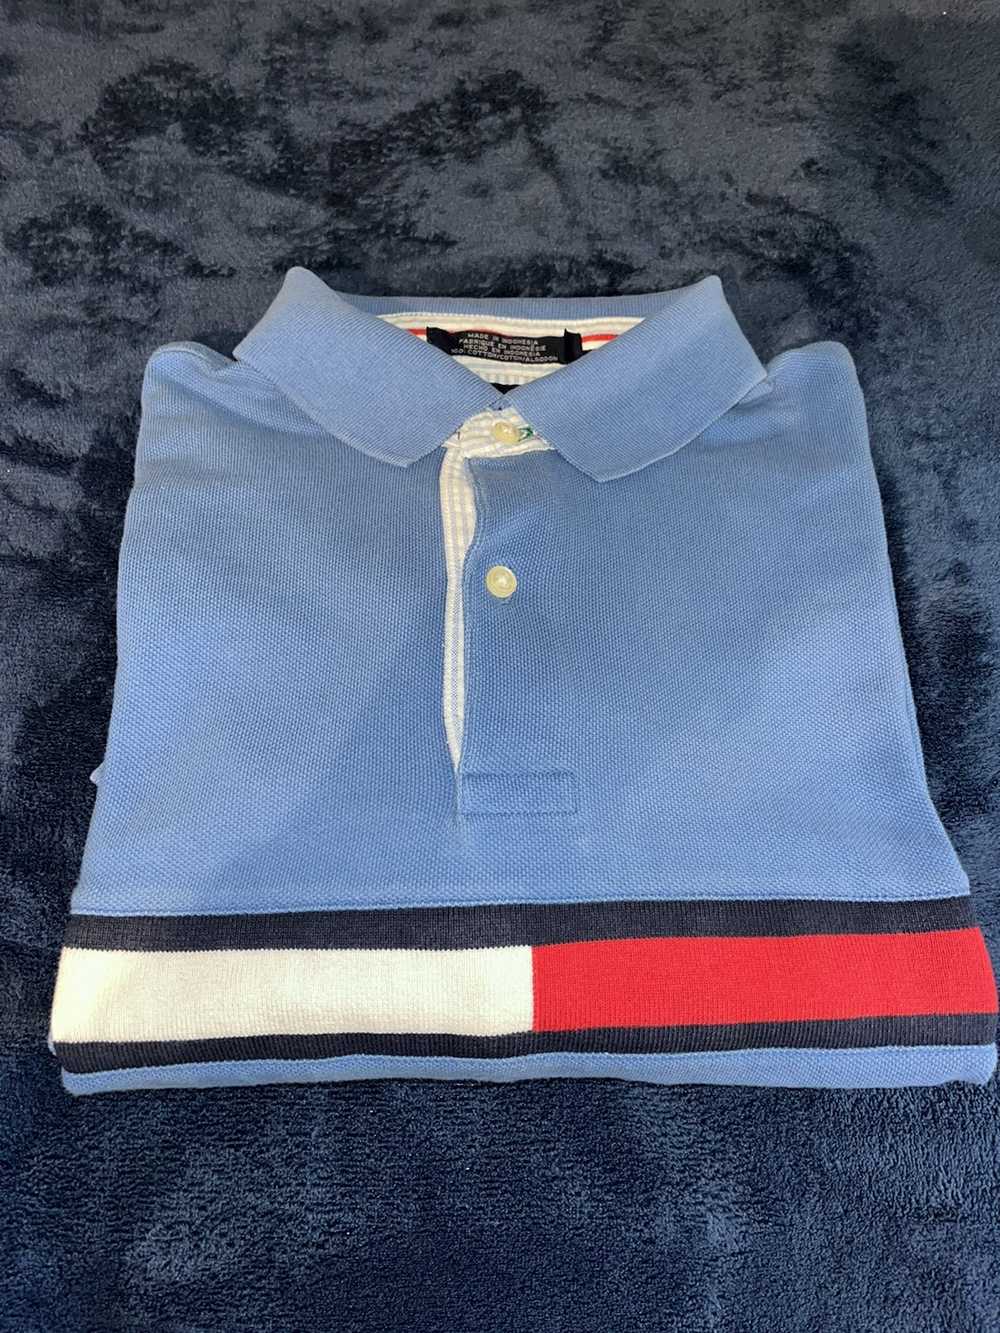 Tommy Hilfiger Baby Blue Tommy Hilfiger Polo - image 2